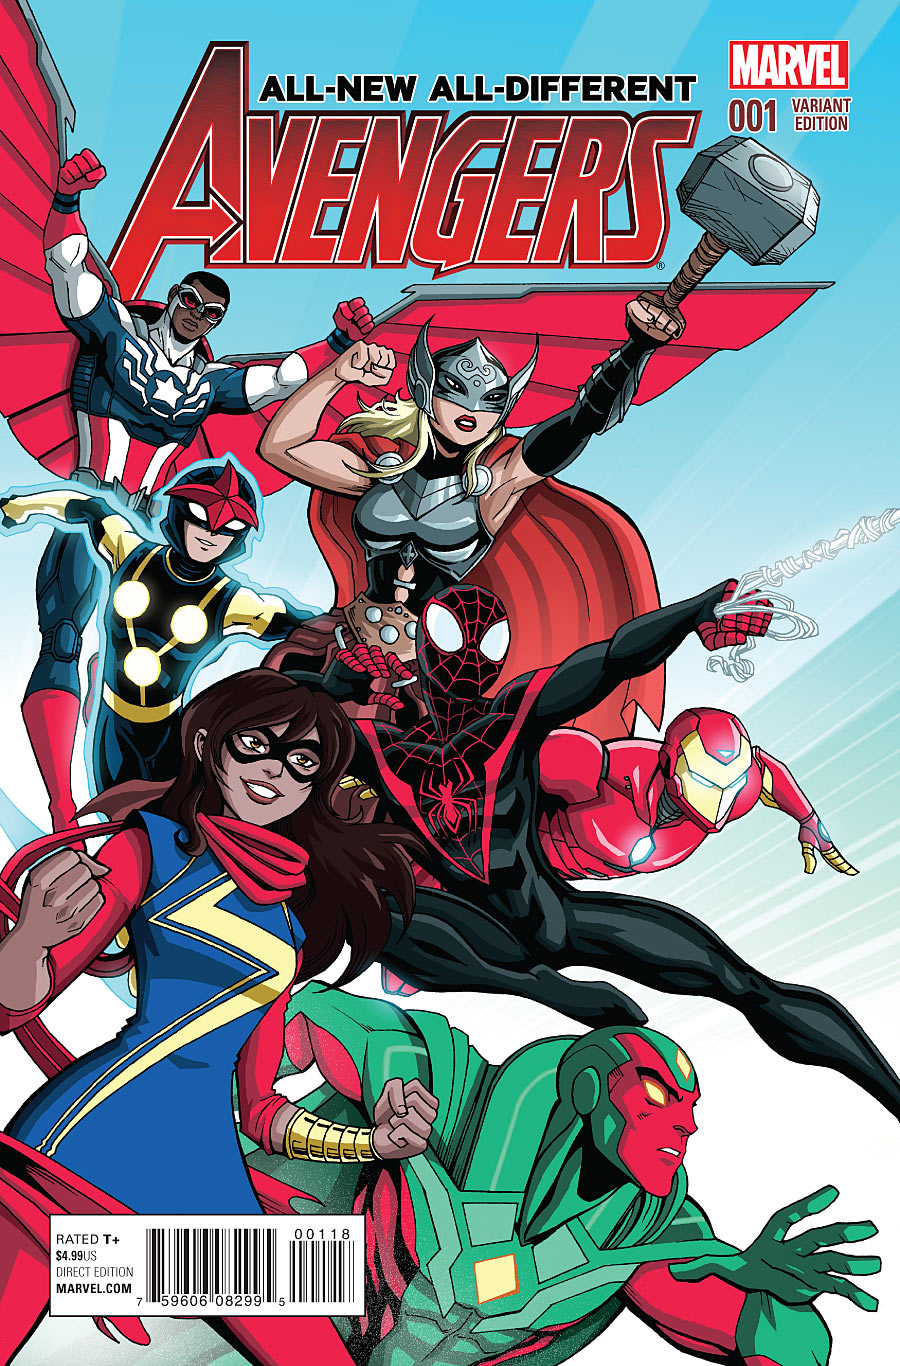 All-New All-Different Avengers #1